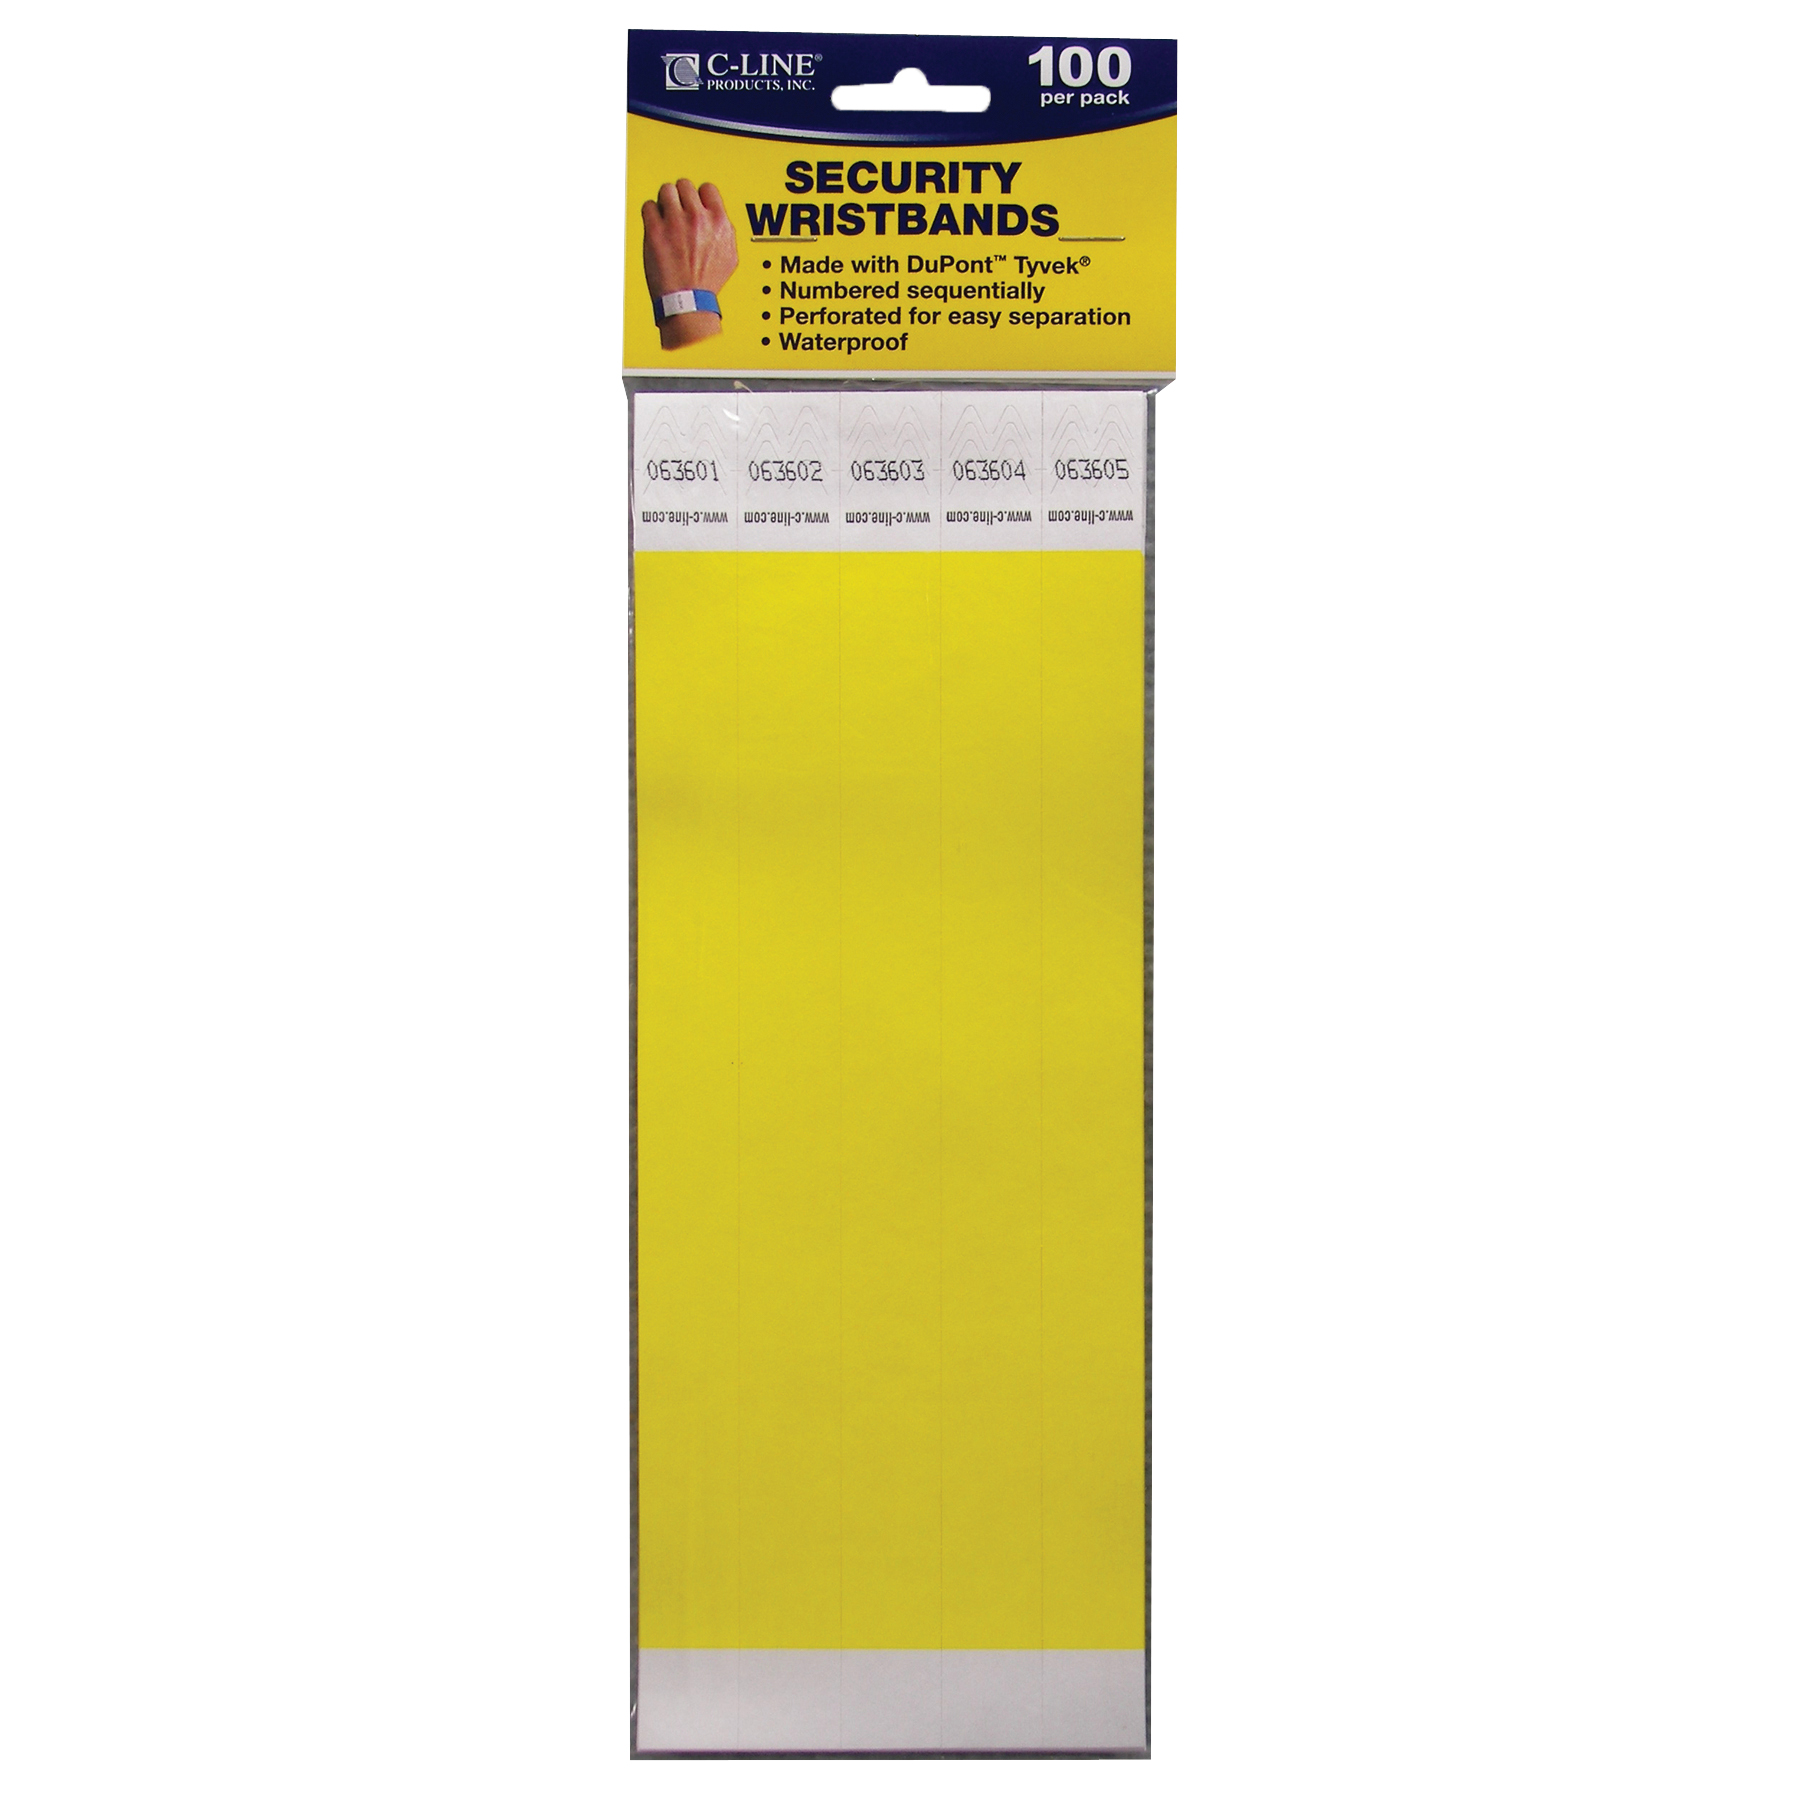 DuPont Tyvek Security Wristbands, Yellow, Pack of 100